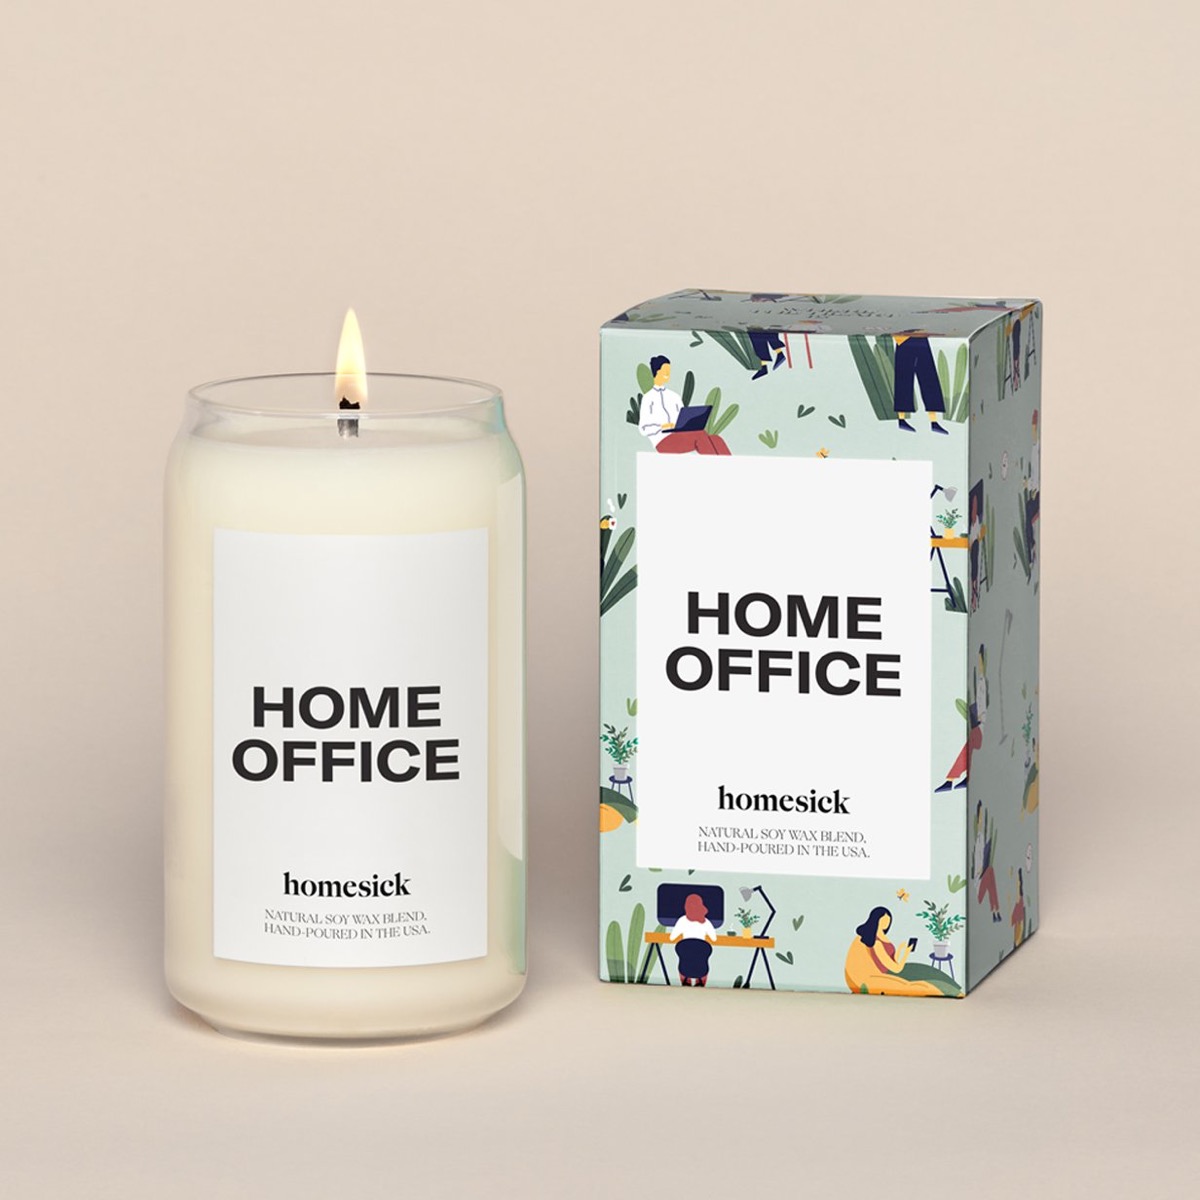 Home office candle with box